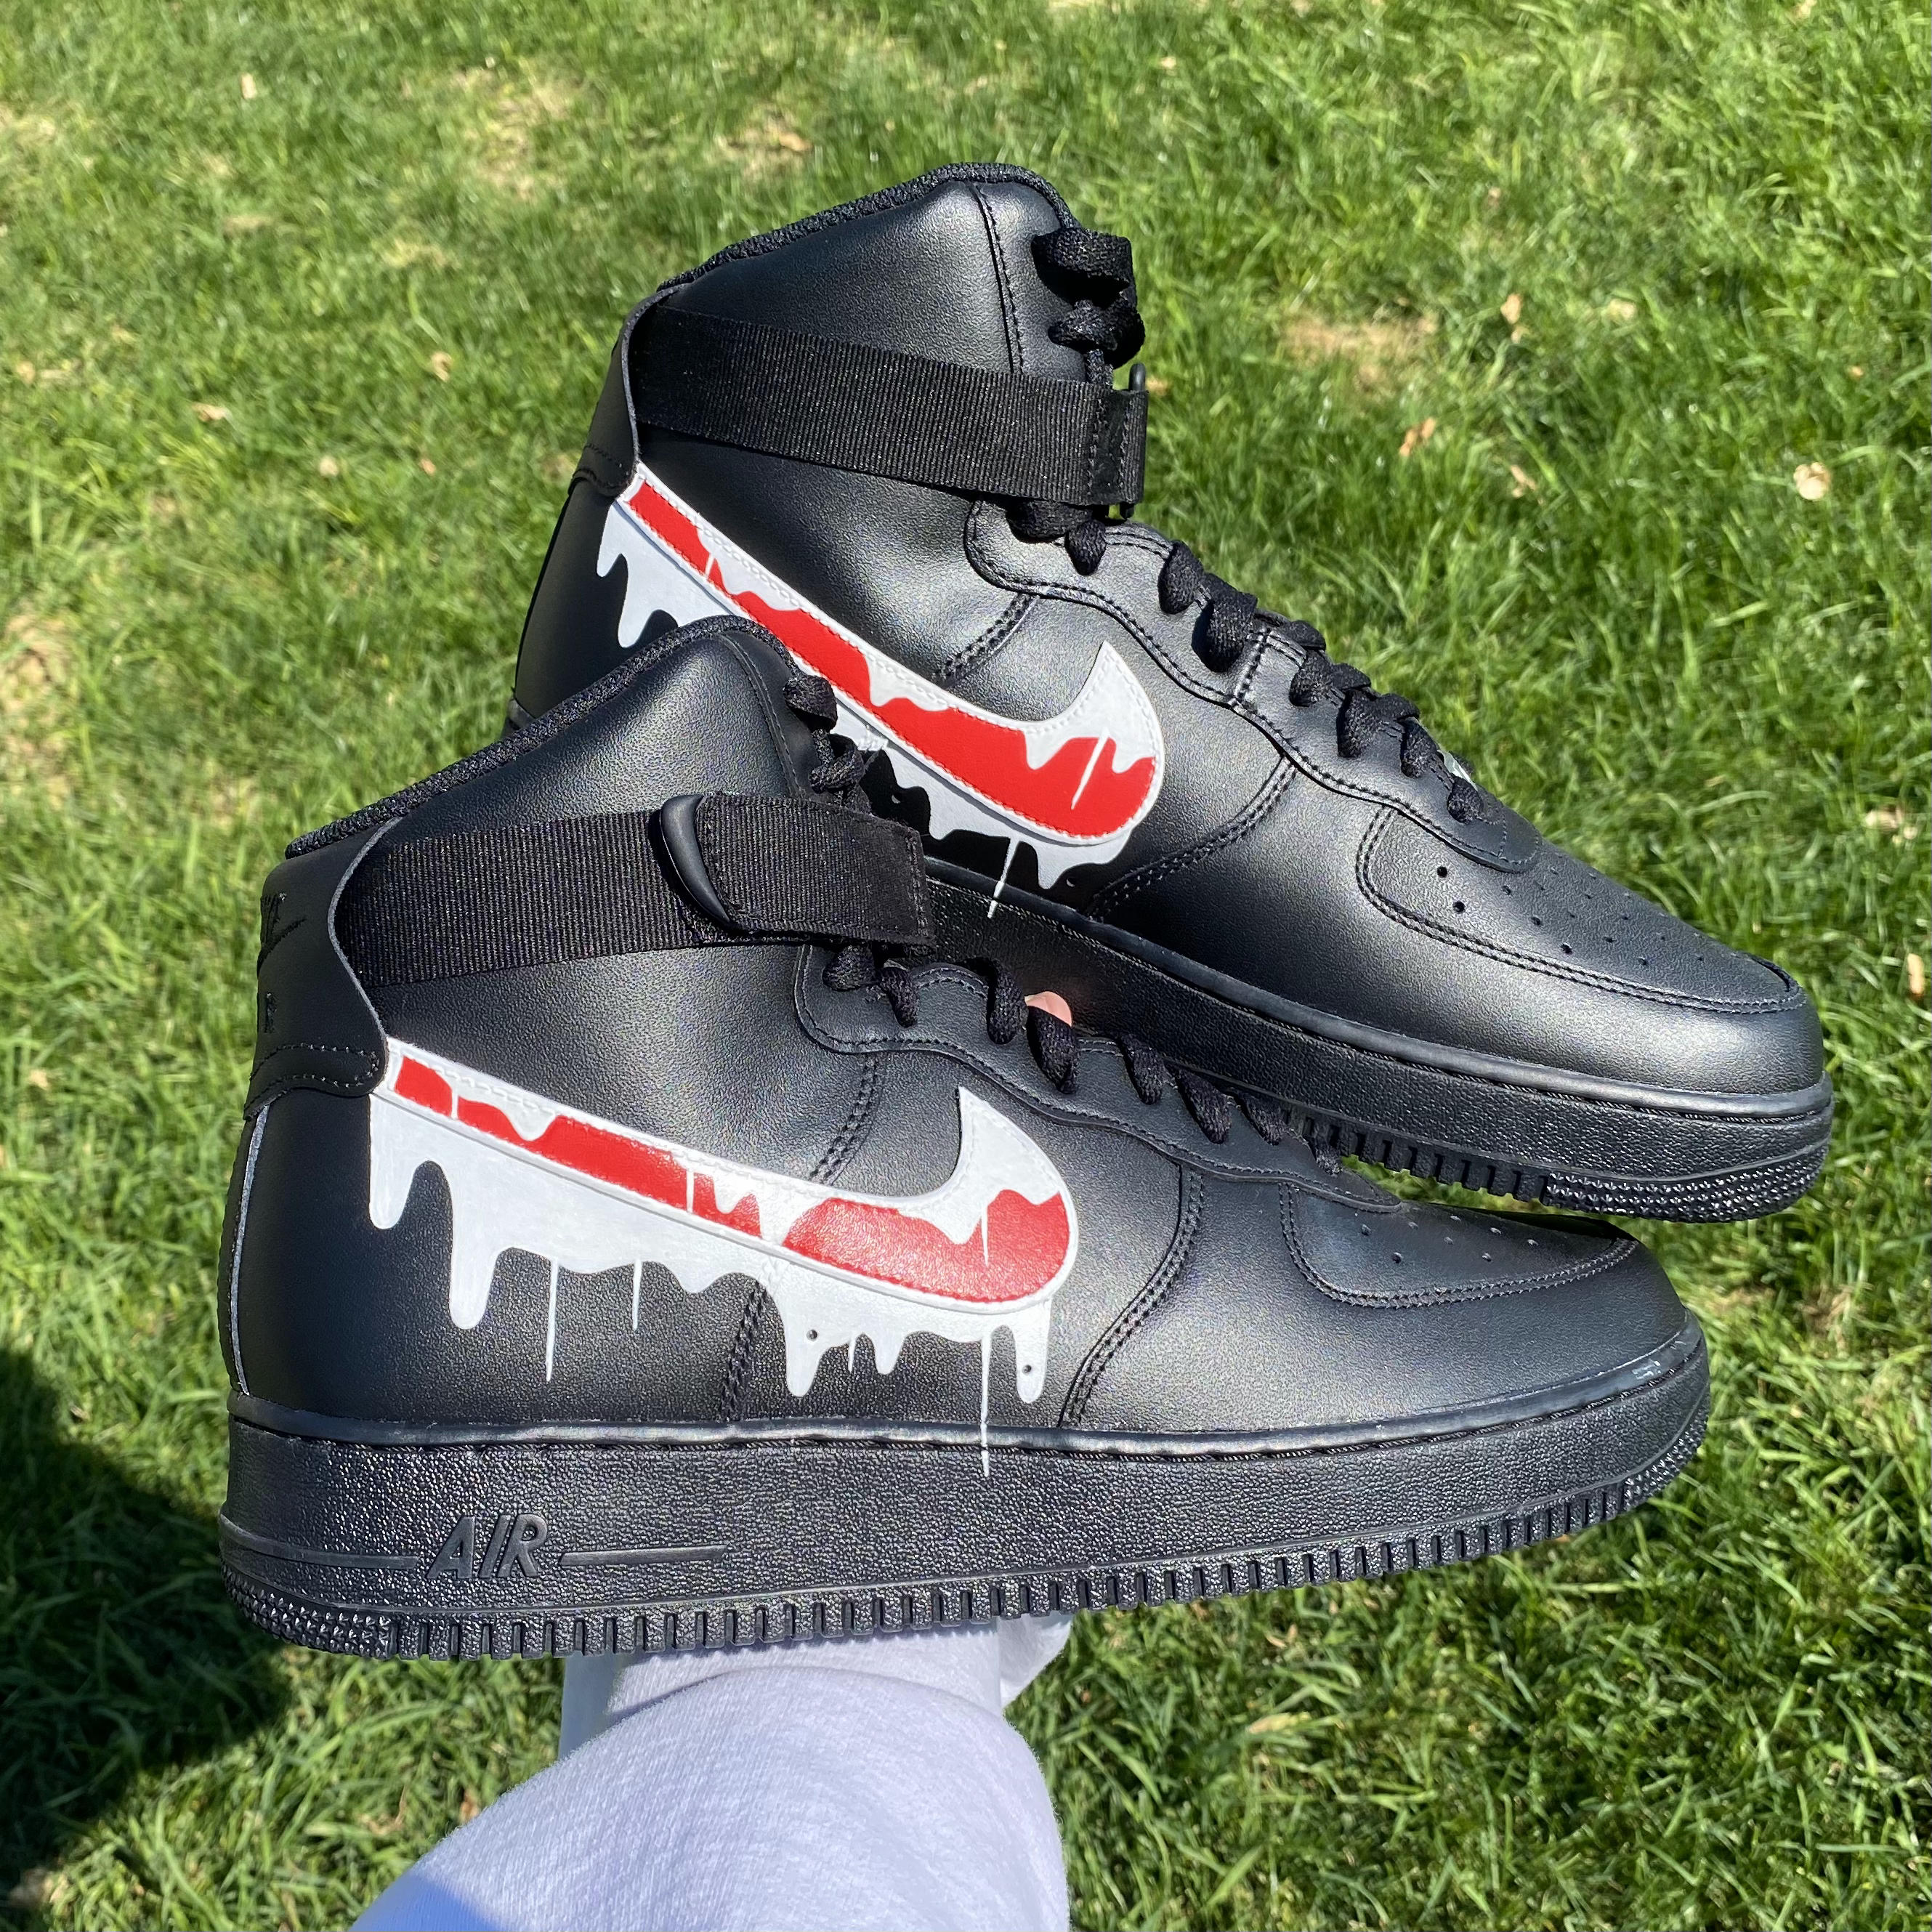 Red and Black Drip Air Force 1 Custom